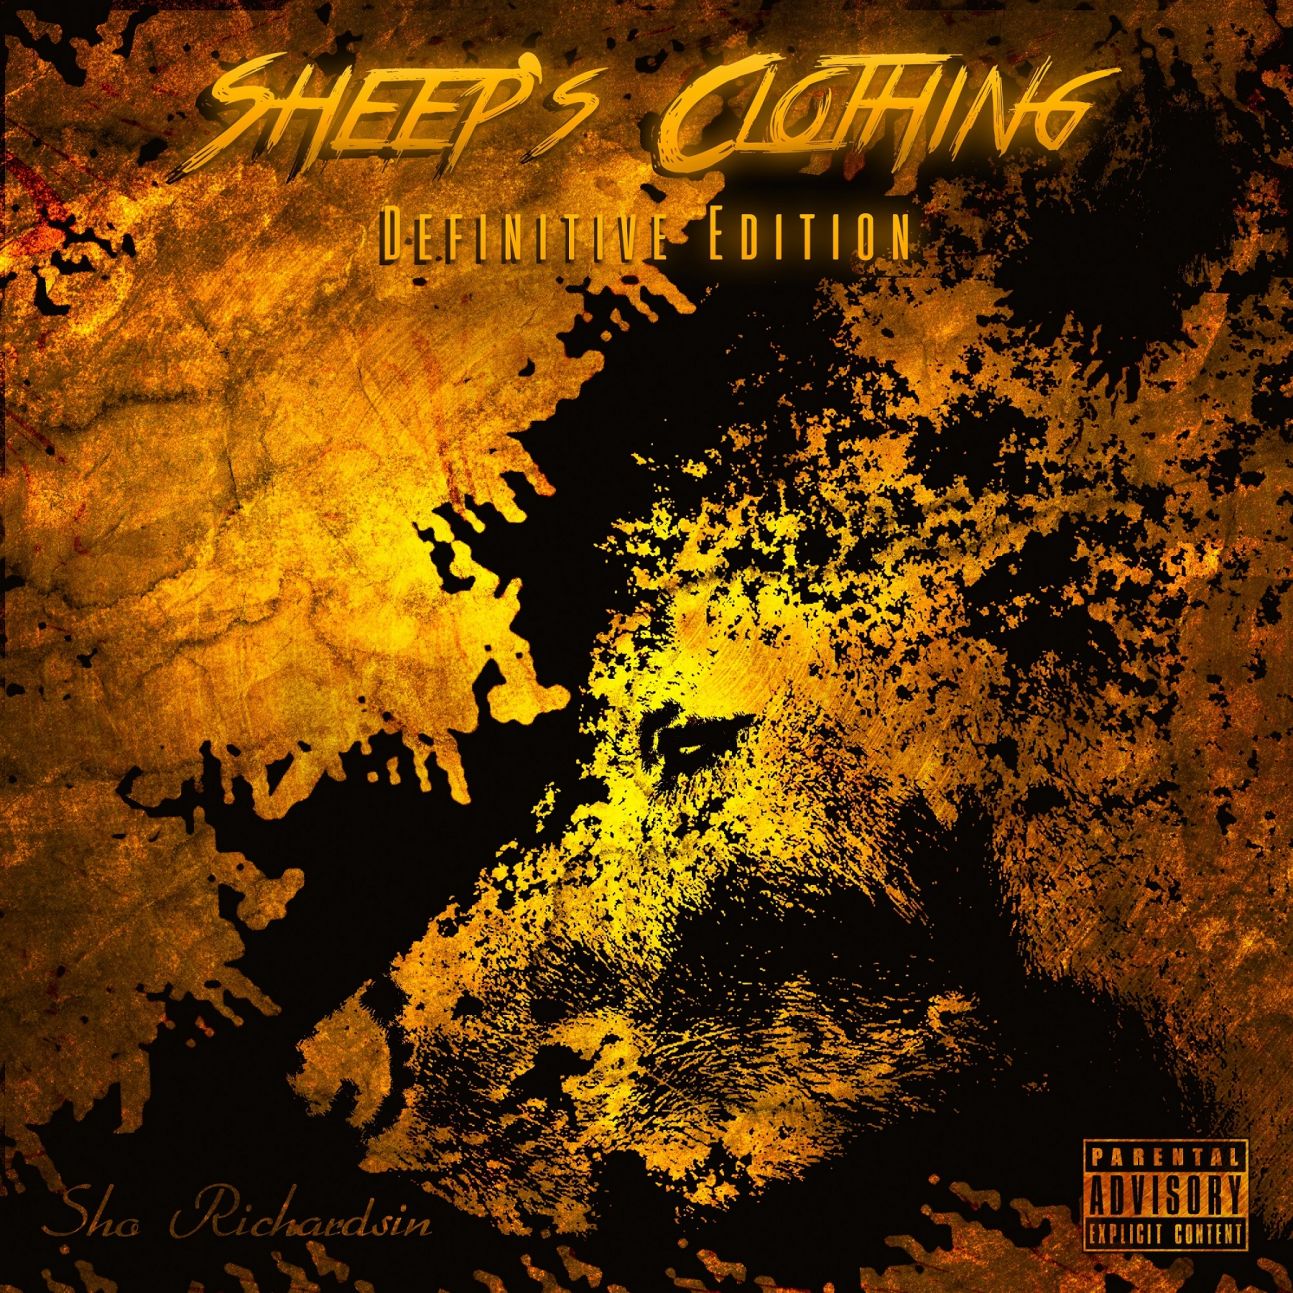 Sheeps Clothing Definitive Edition